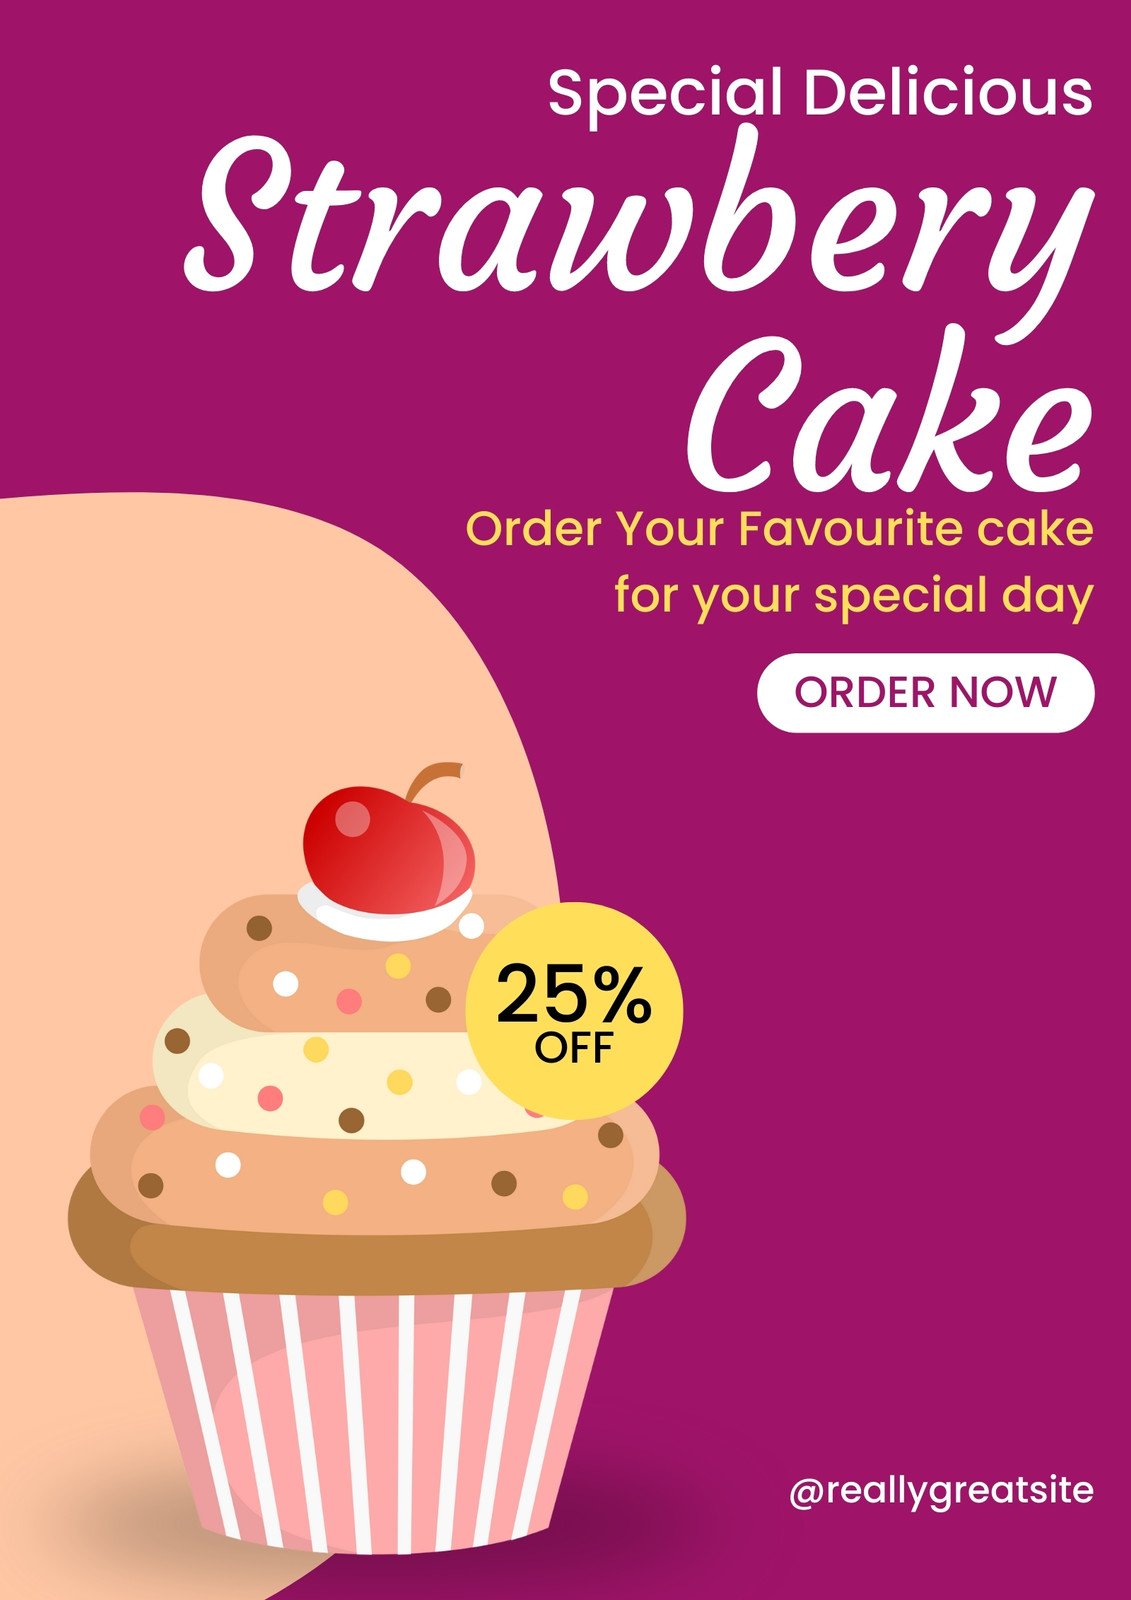 Cake Shop Flyer Template | PosterMyWall